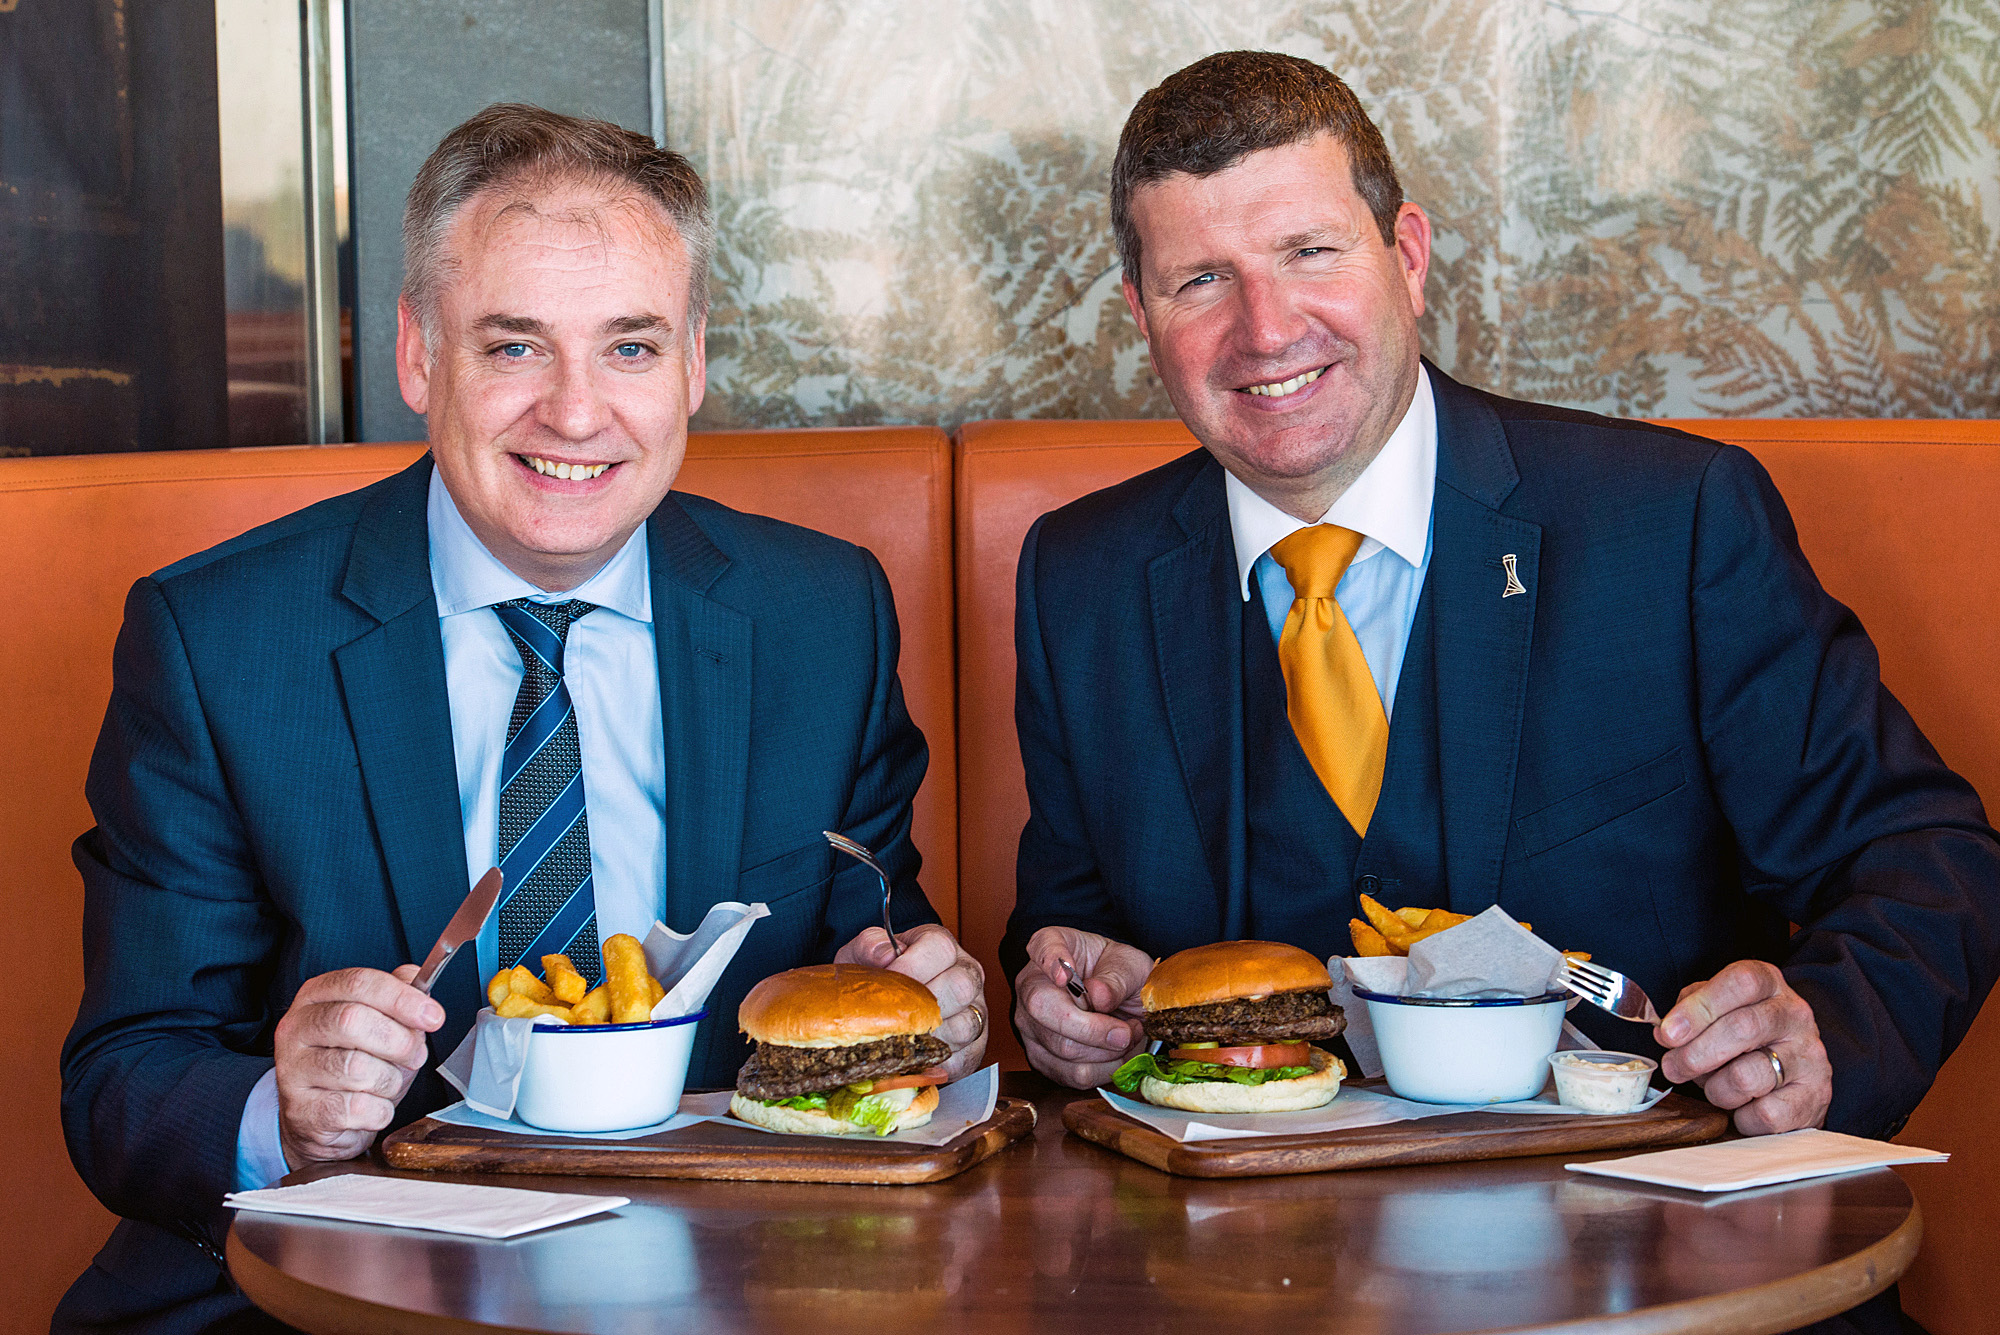 Edinburgh Airport promises to support Scottish Food and Drink | The